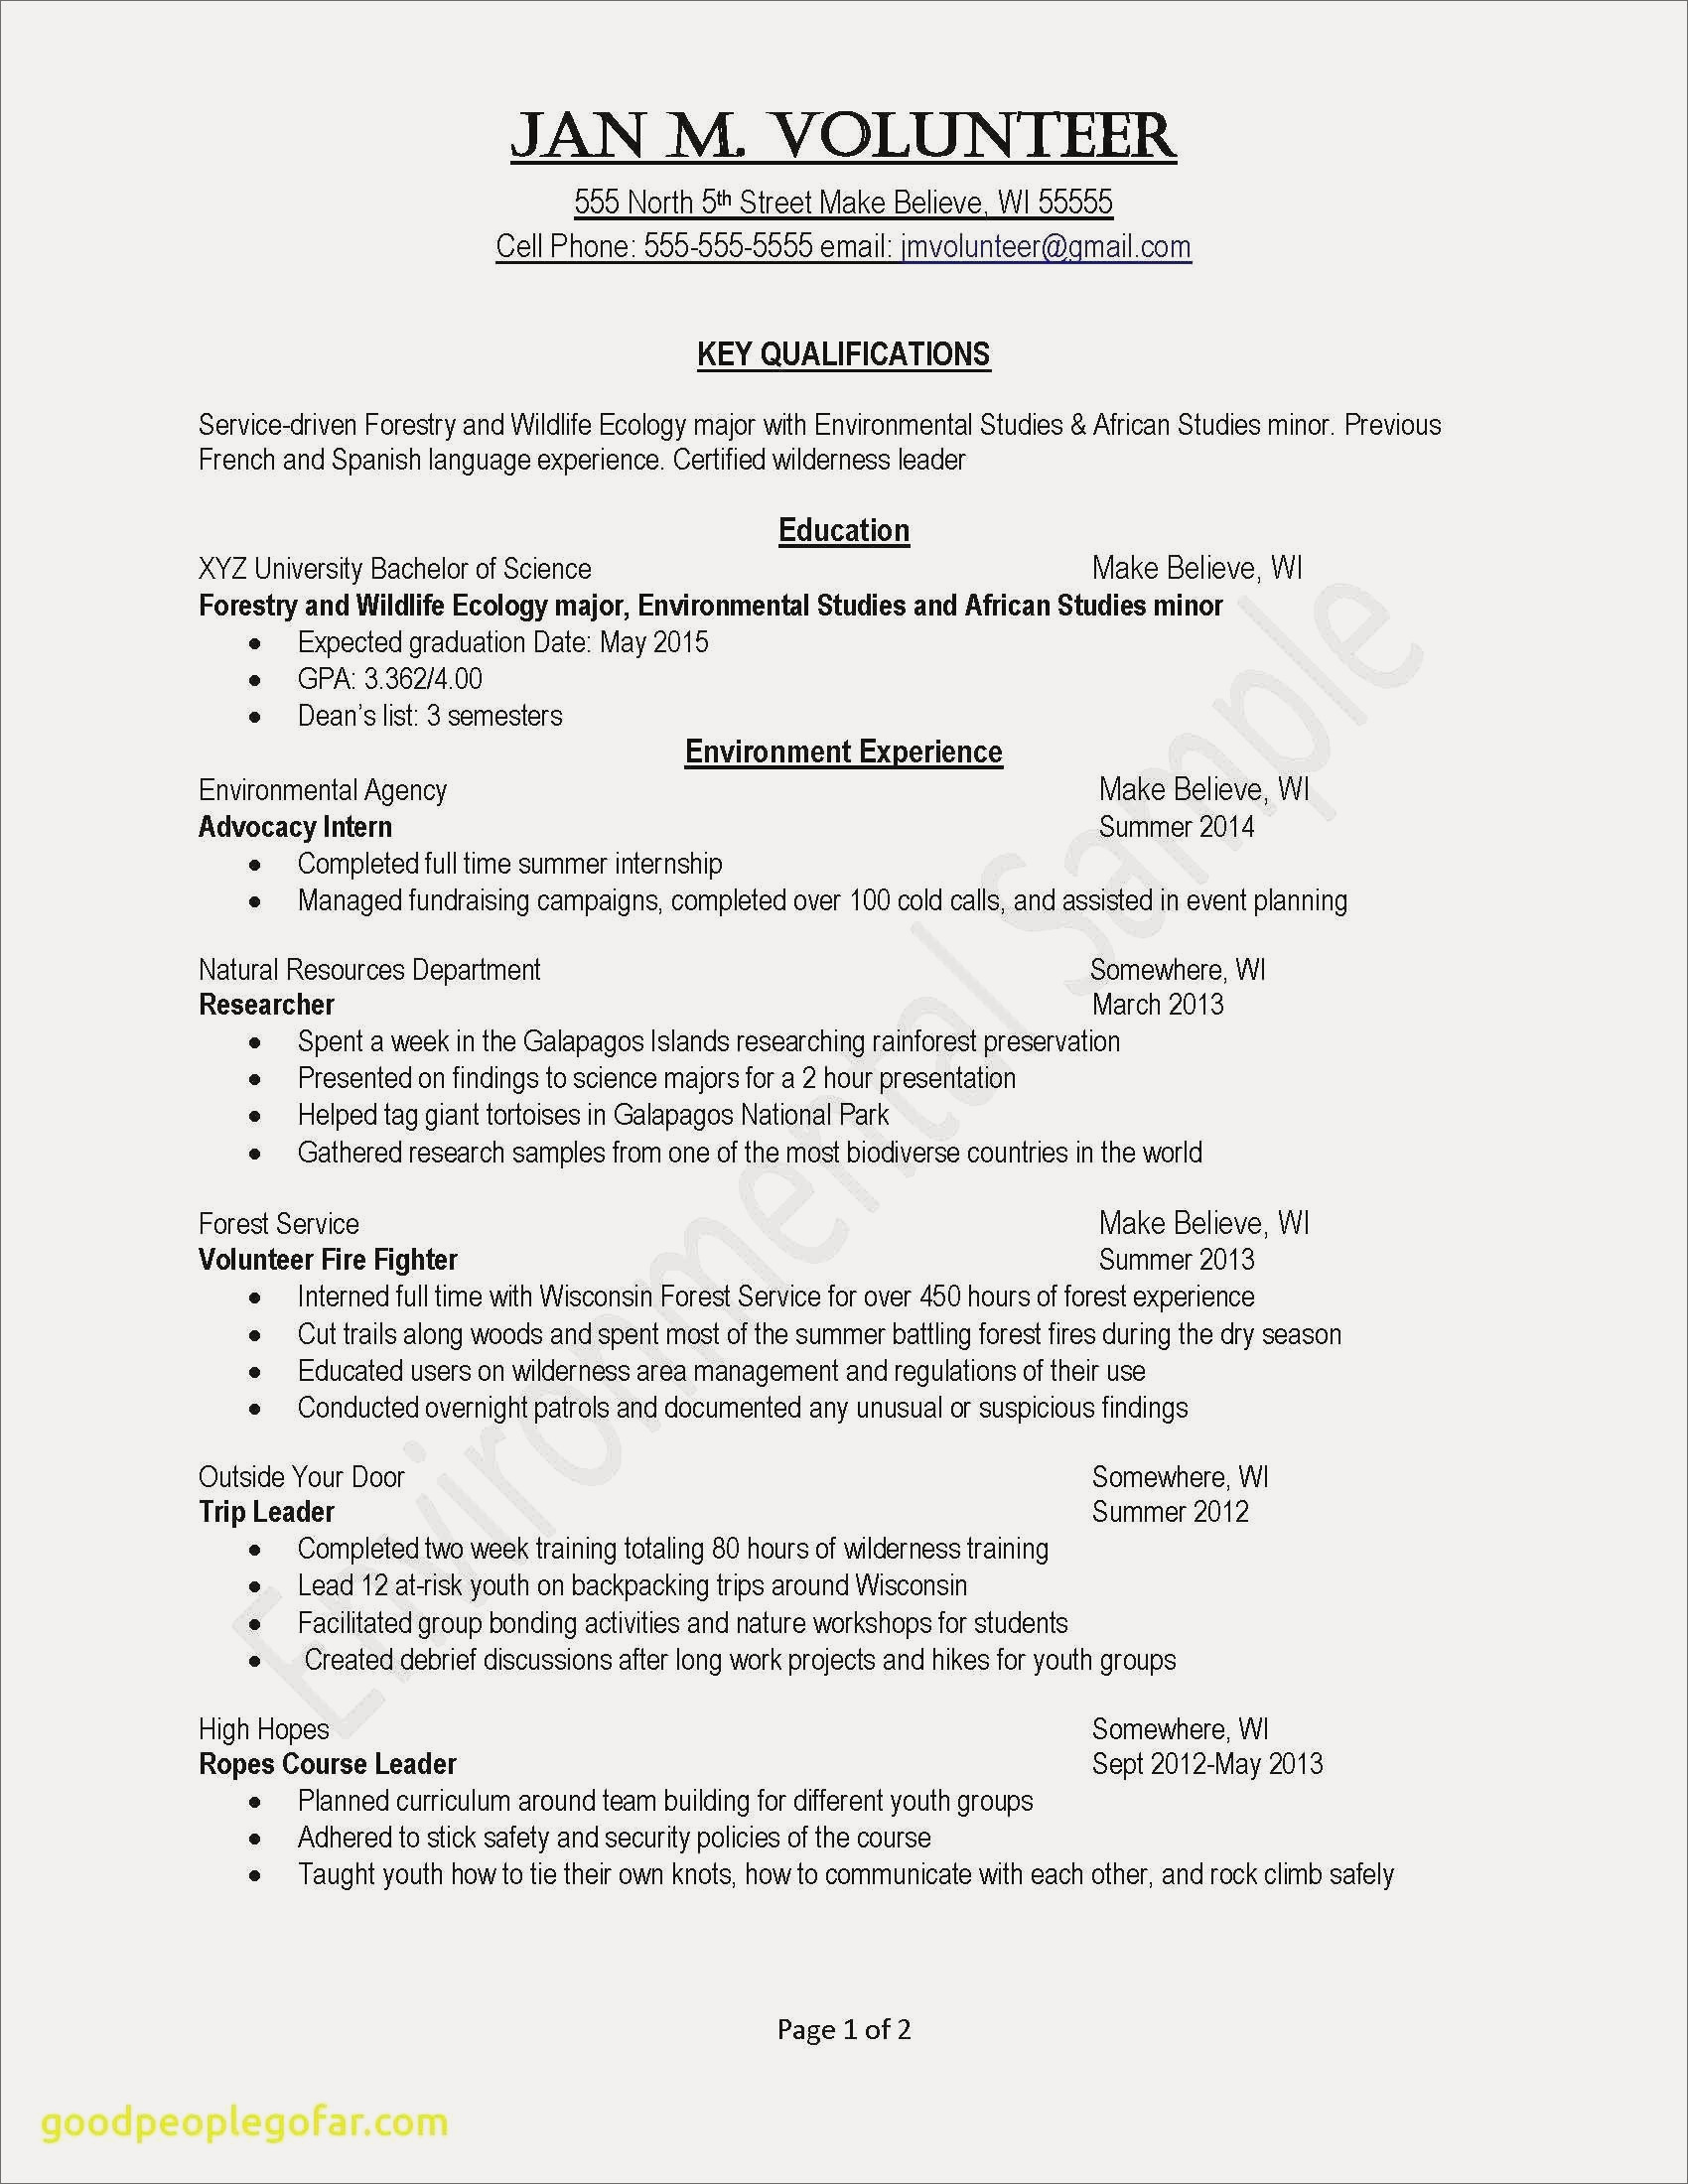 Good Skills To Put On Resume Resume Examples Foreign Language Skills New Images Great Skills To Put Resume Awesome Skill To Put A Resume Unique Of Resume Examples Foreign Language Skills good skills to put on resume|wikiresume.com